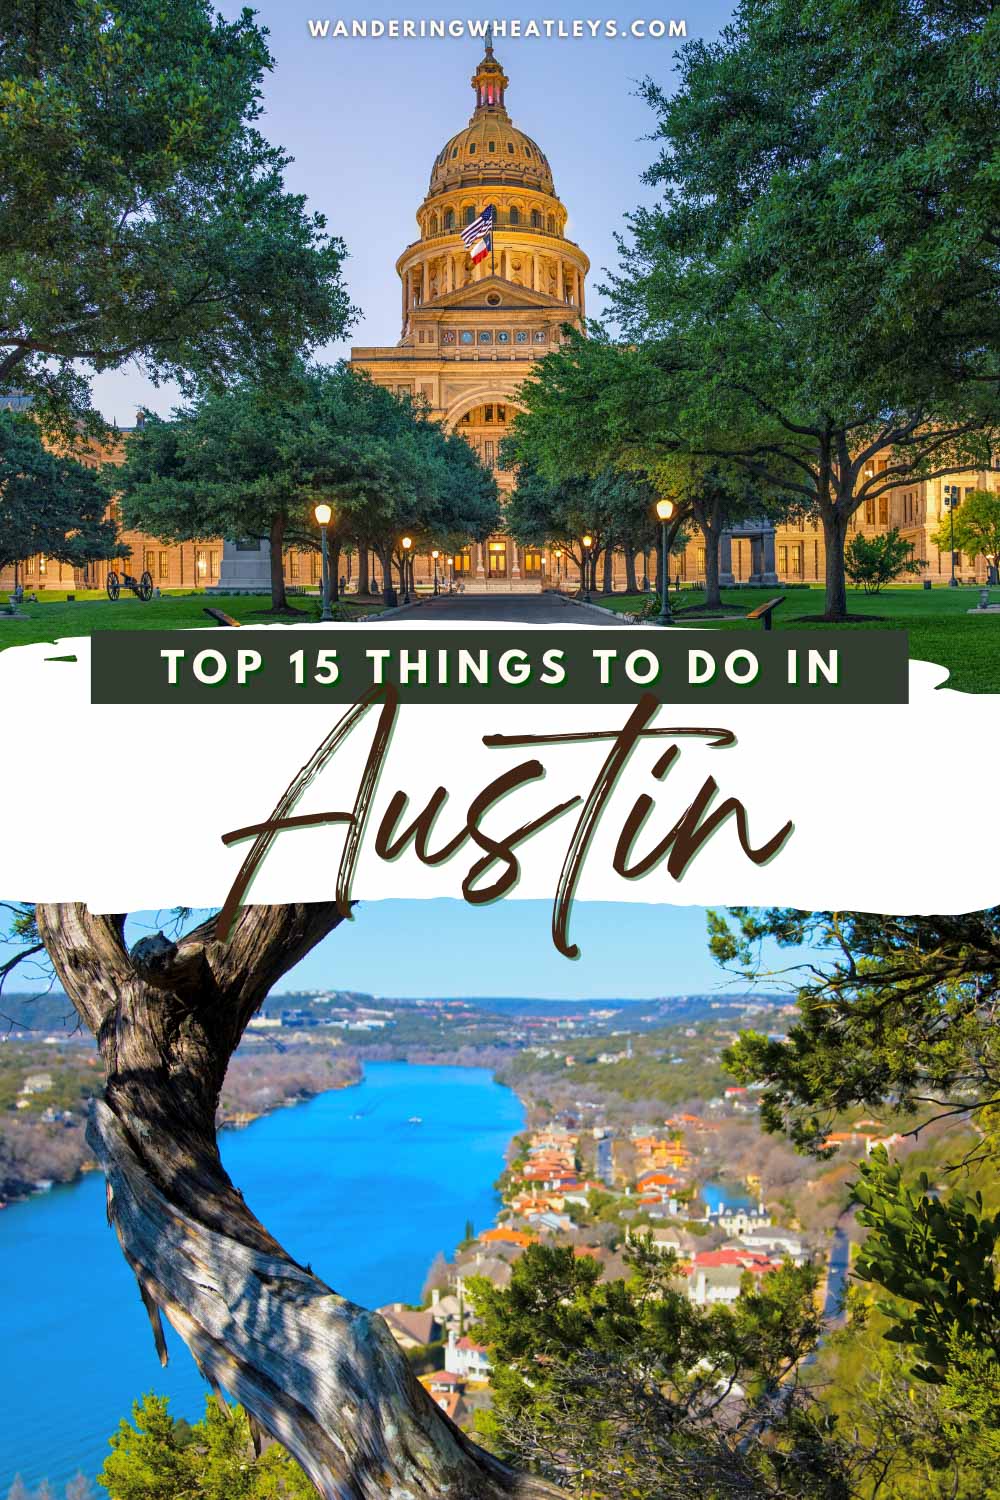 The Best Things to do in Austin, Texas